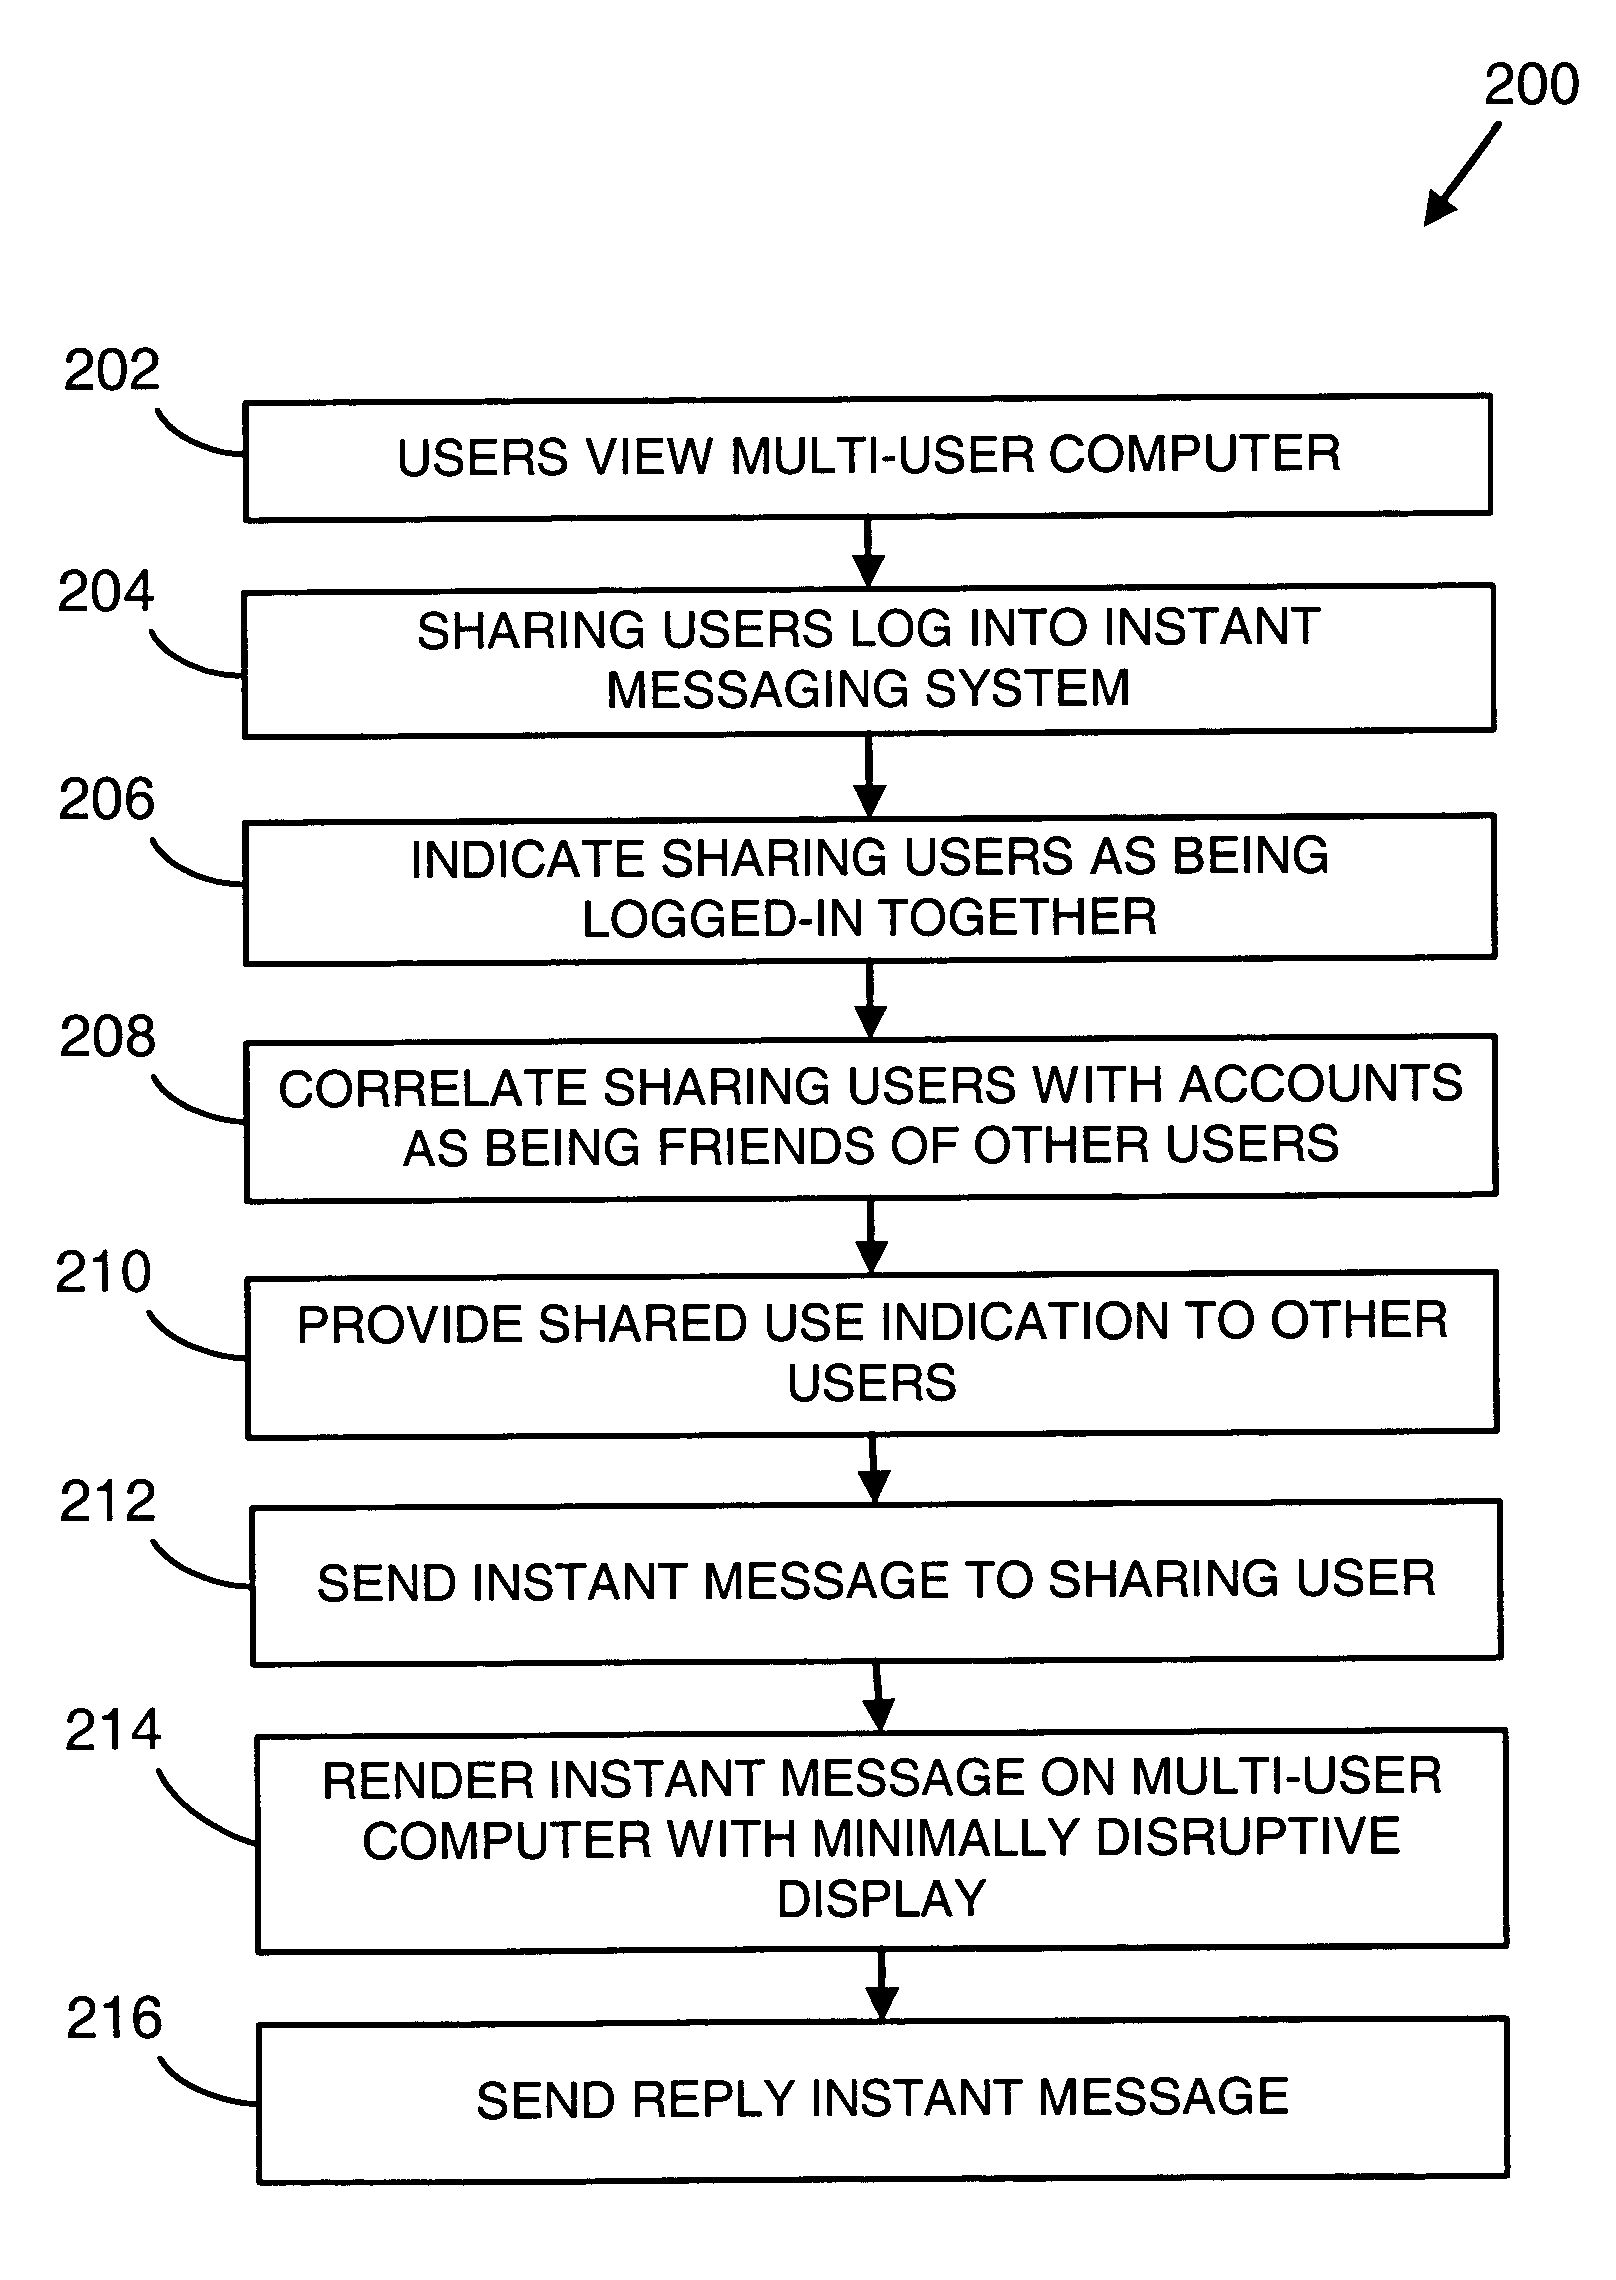 Instant messaging for multi-user computers